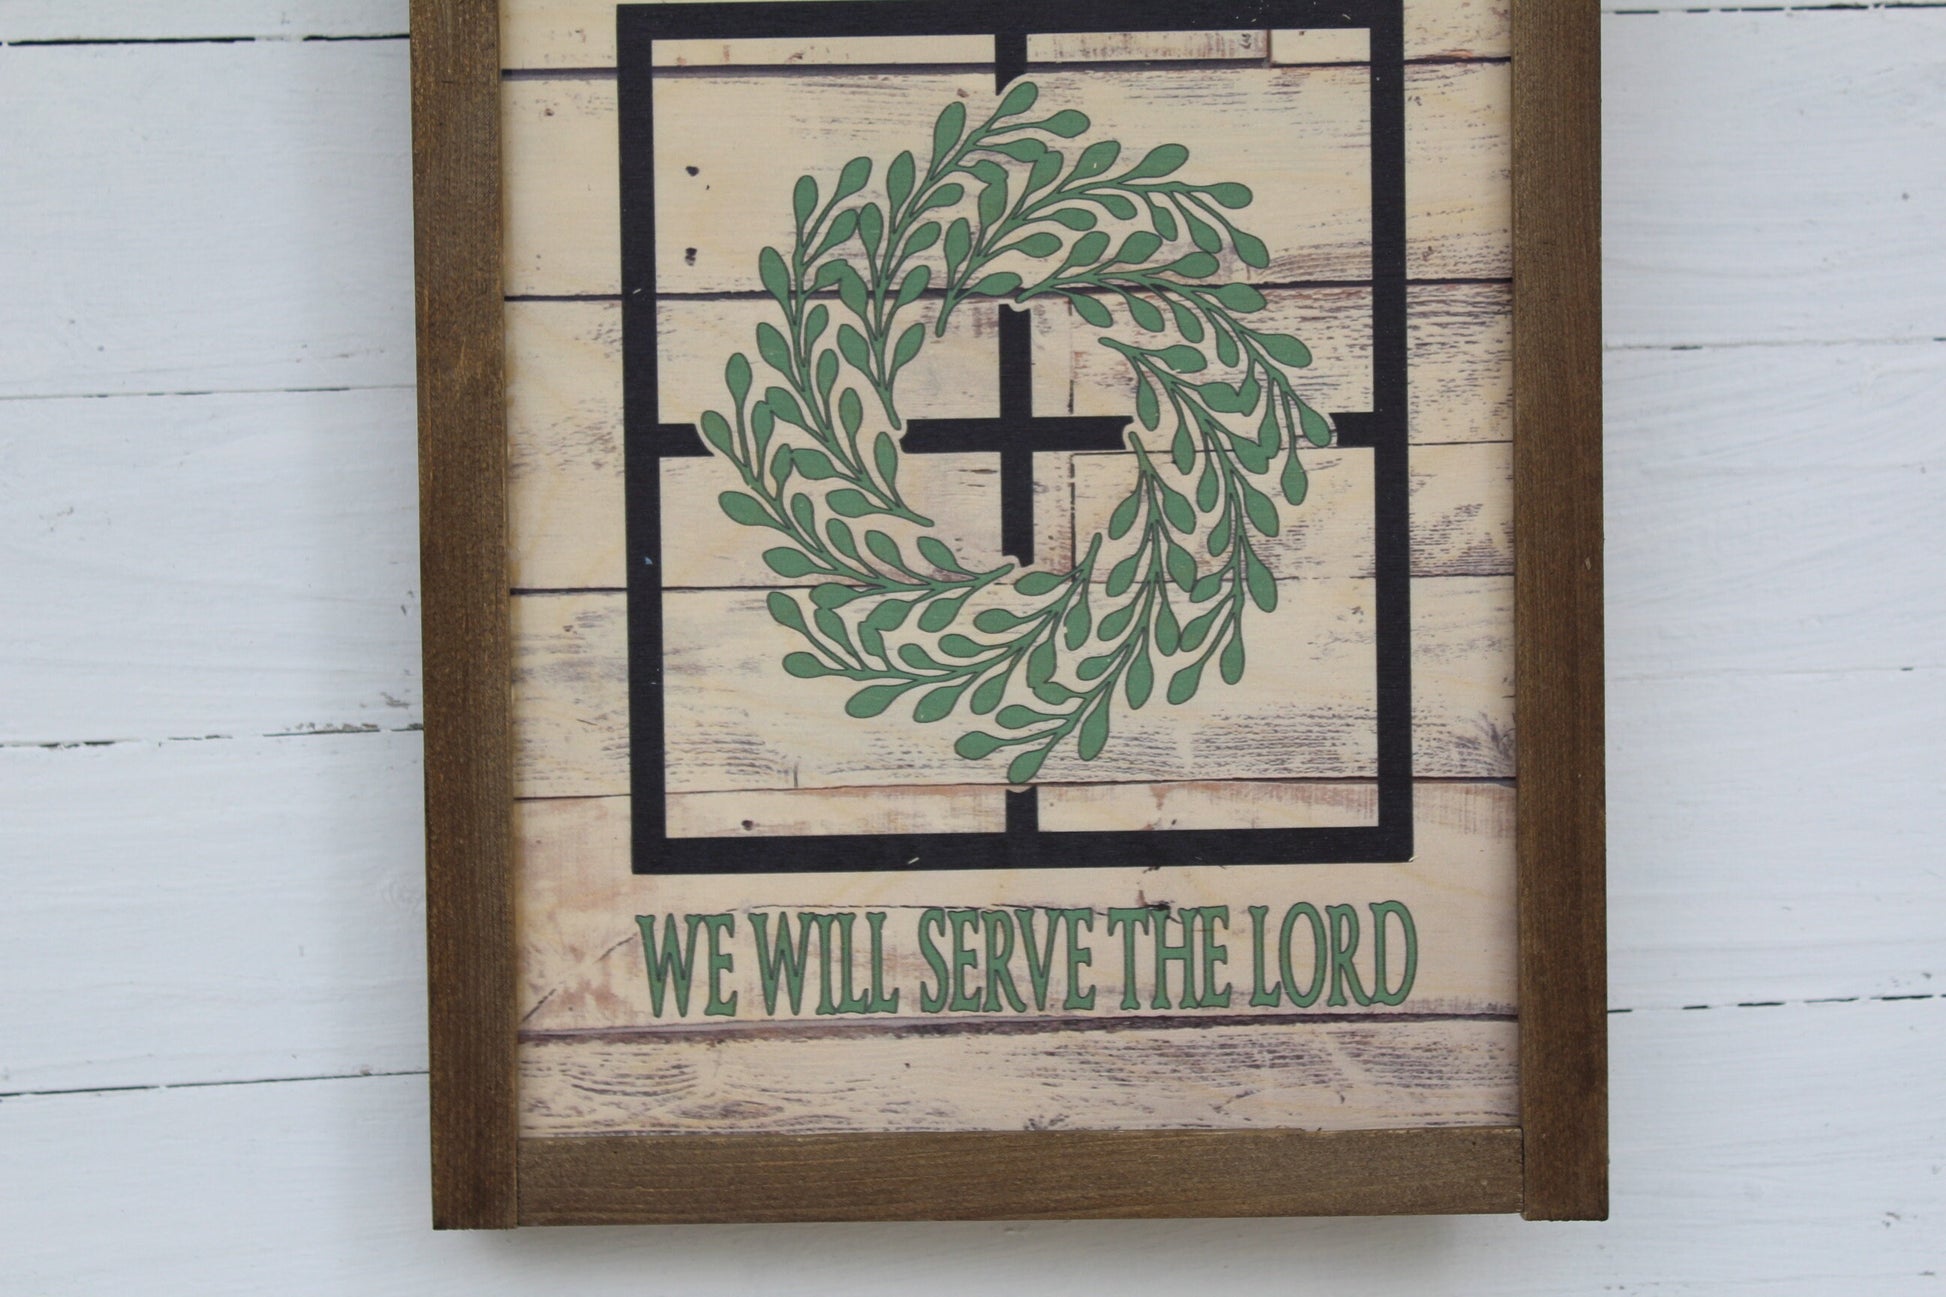 As For Me and My House We Will Serve the Lord Window Eucalyptus Wreath Sign Rustic Wood Farmhouse Primitive Wall Jesus Christ Religious